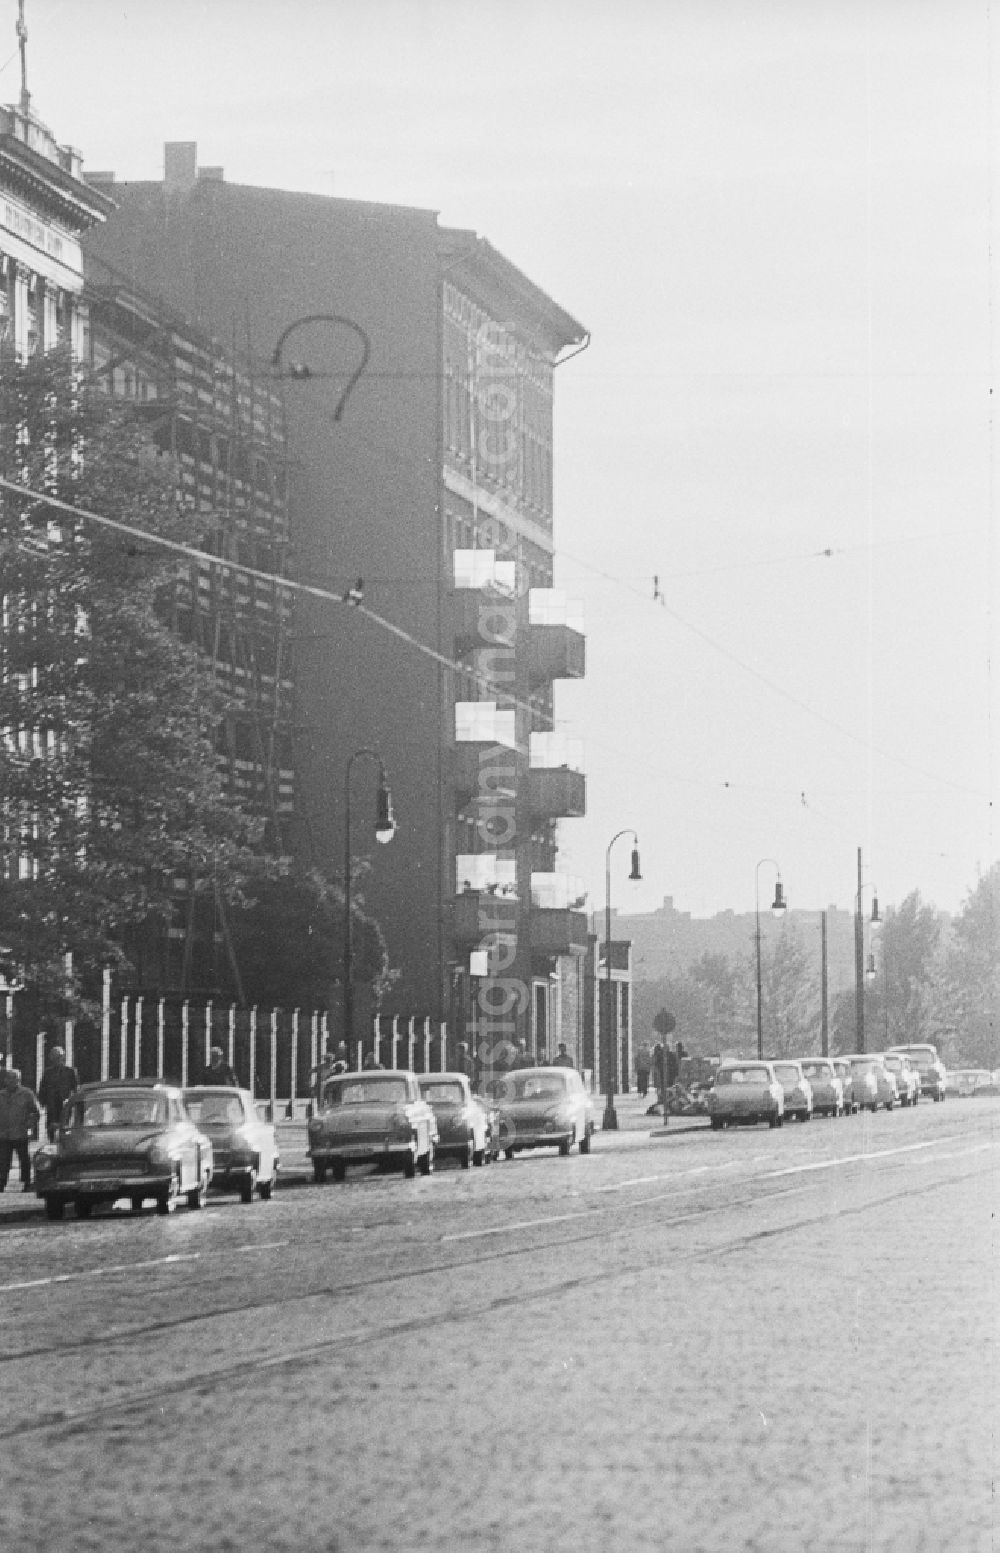 GDR picture archive: Berlin - Apartment blocks at the Bornholmer street in Berlin, the former capital of the GDR, German Democratic Republic